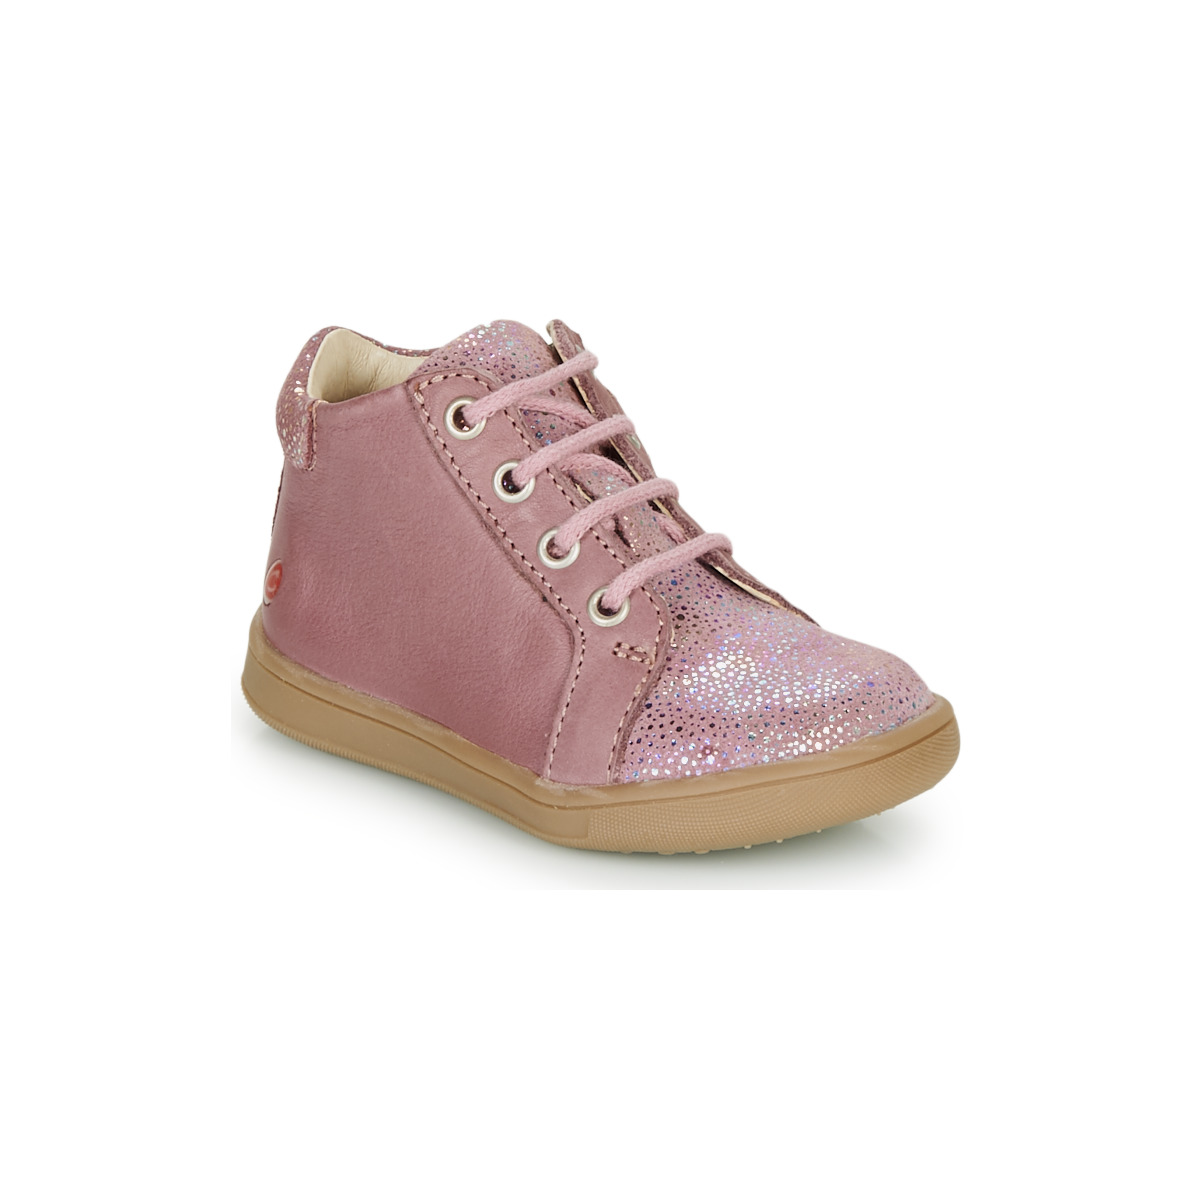 Shoes Girl Hi top trainers GBB FAMIA Old / Pink